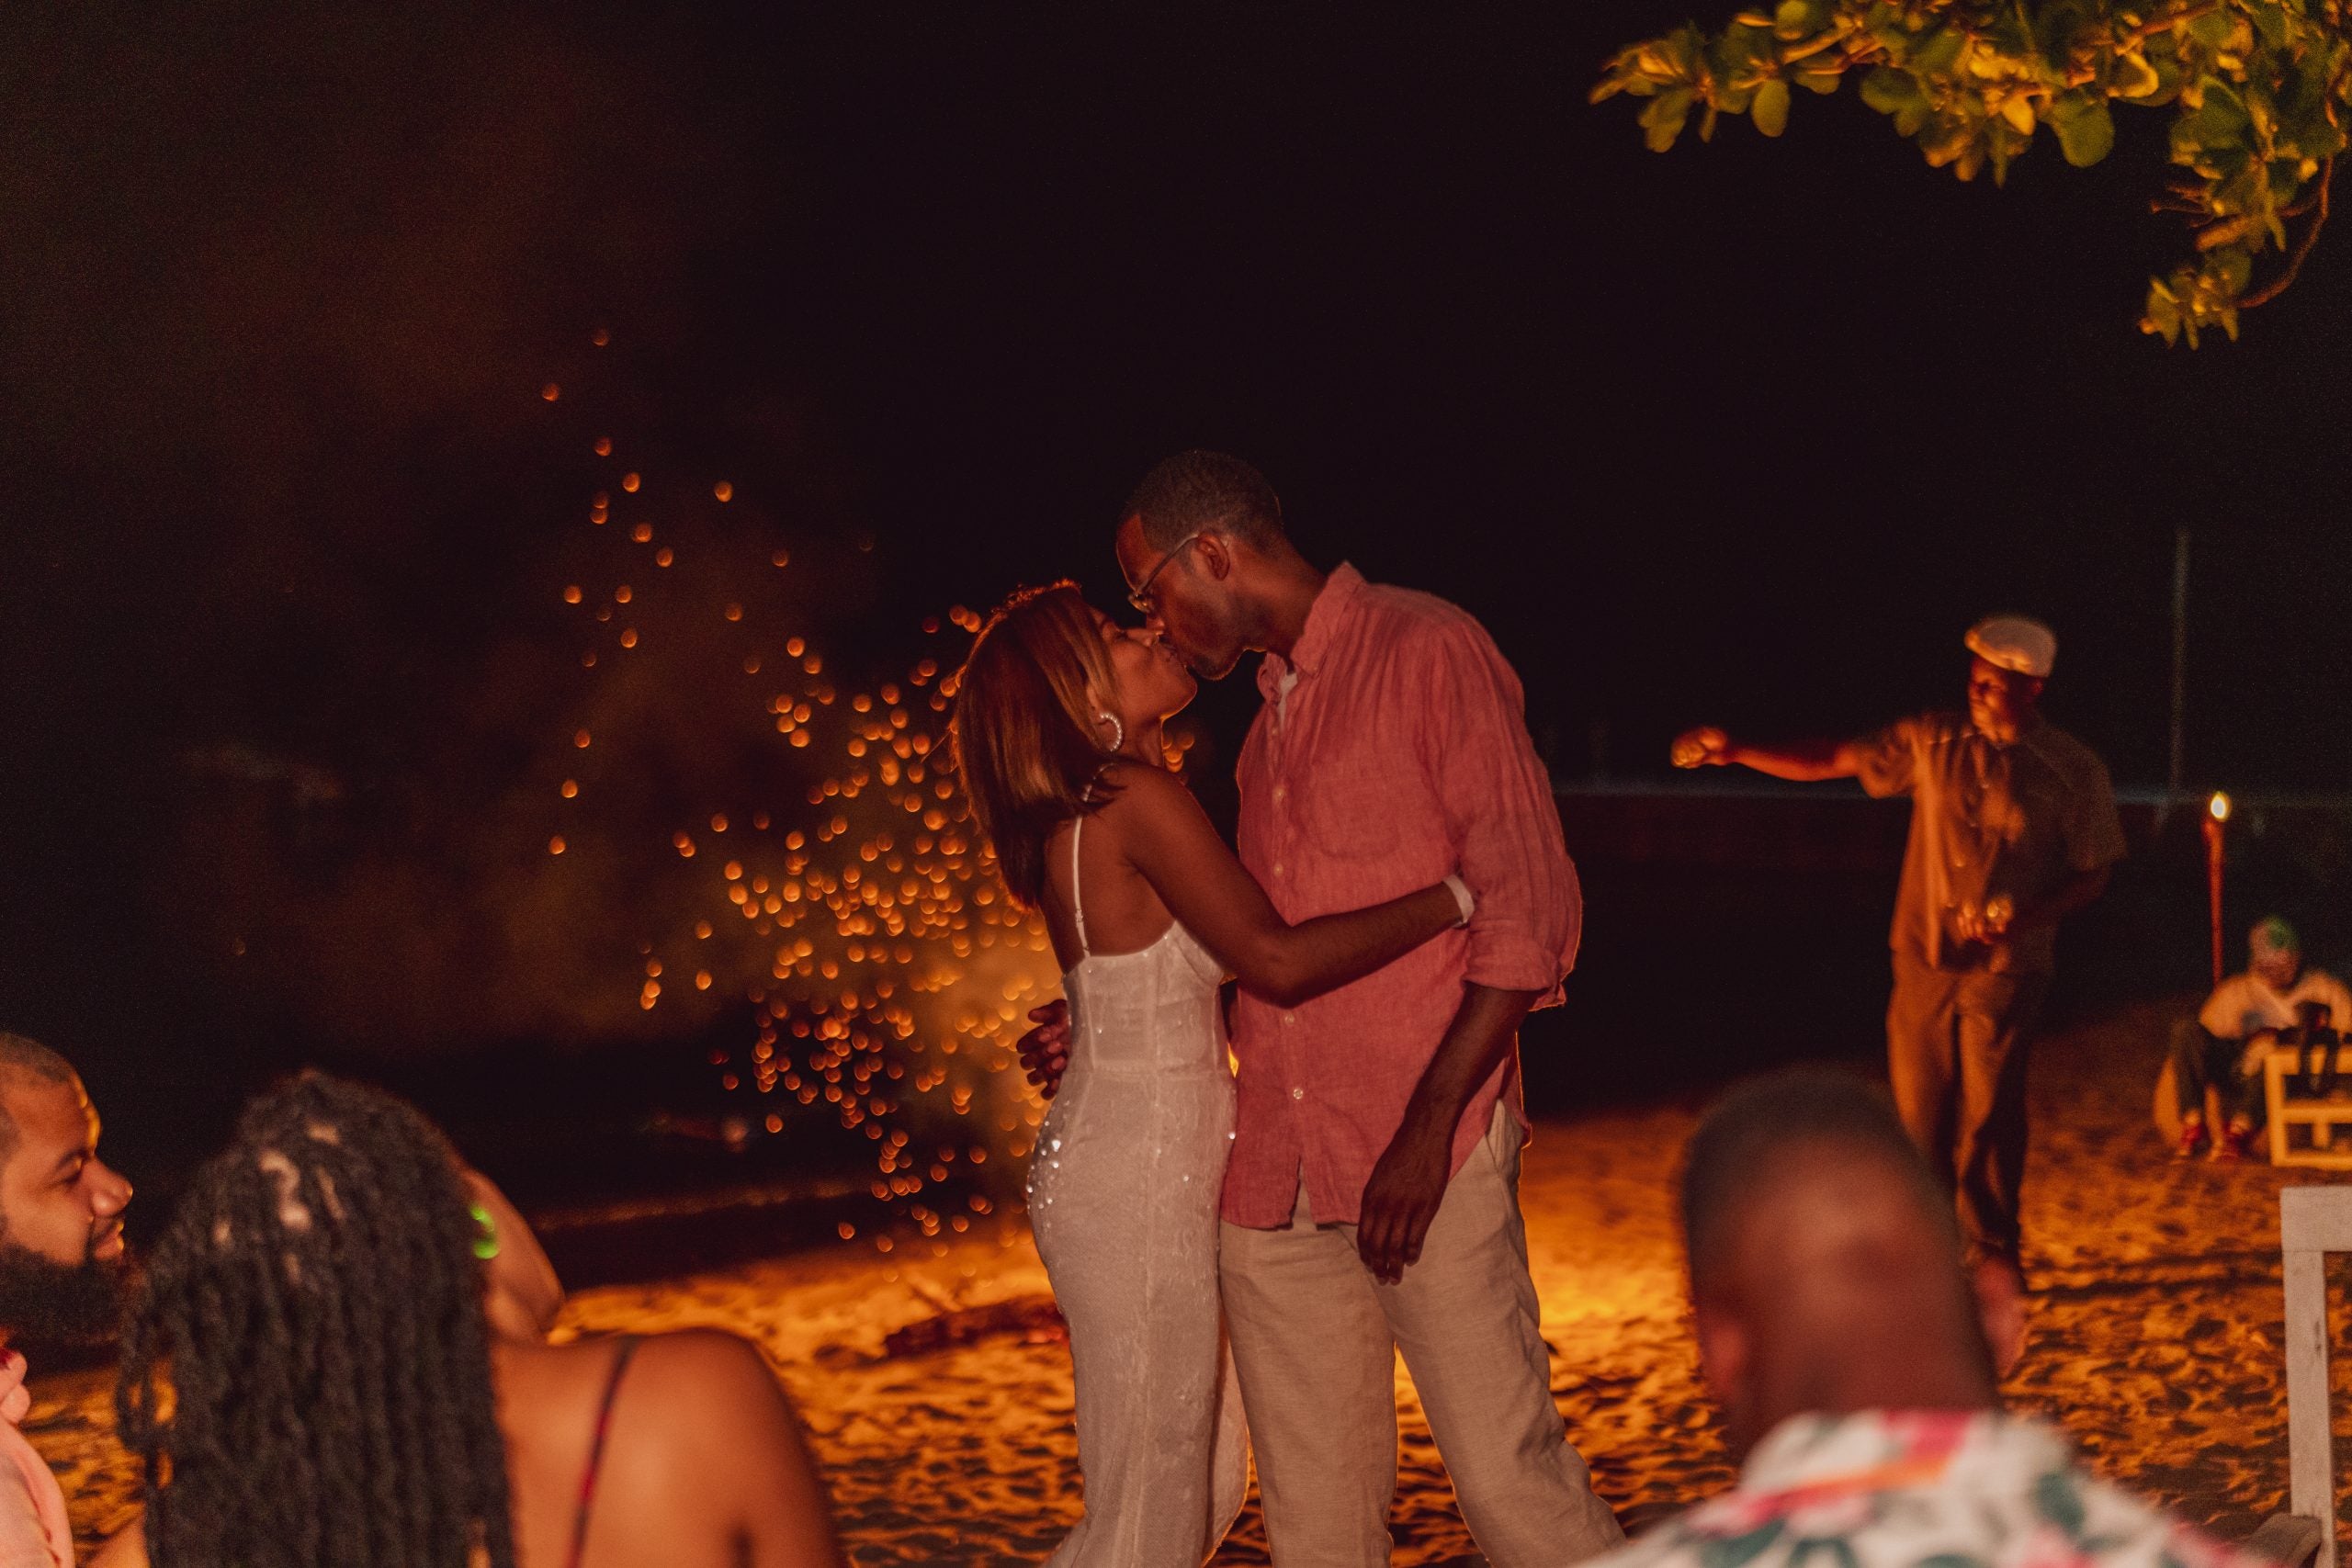 Bridal Bliss: Brittany and Oliver's Sweet St. Lucia Wedding Was Unforgettable